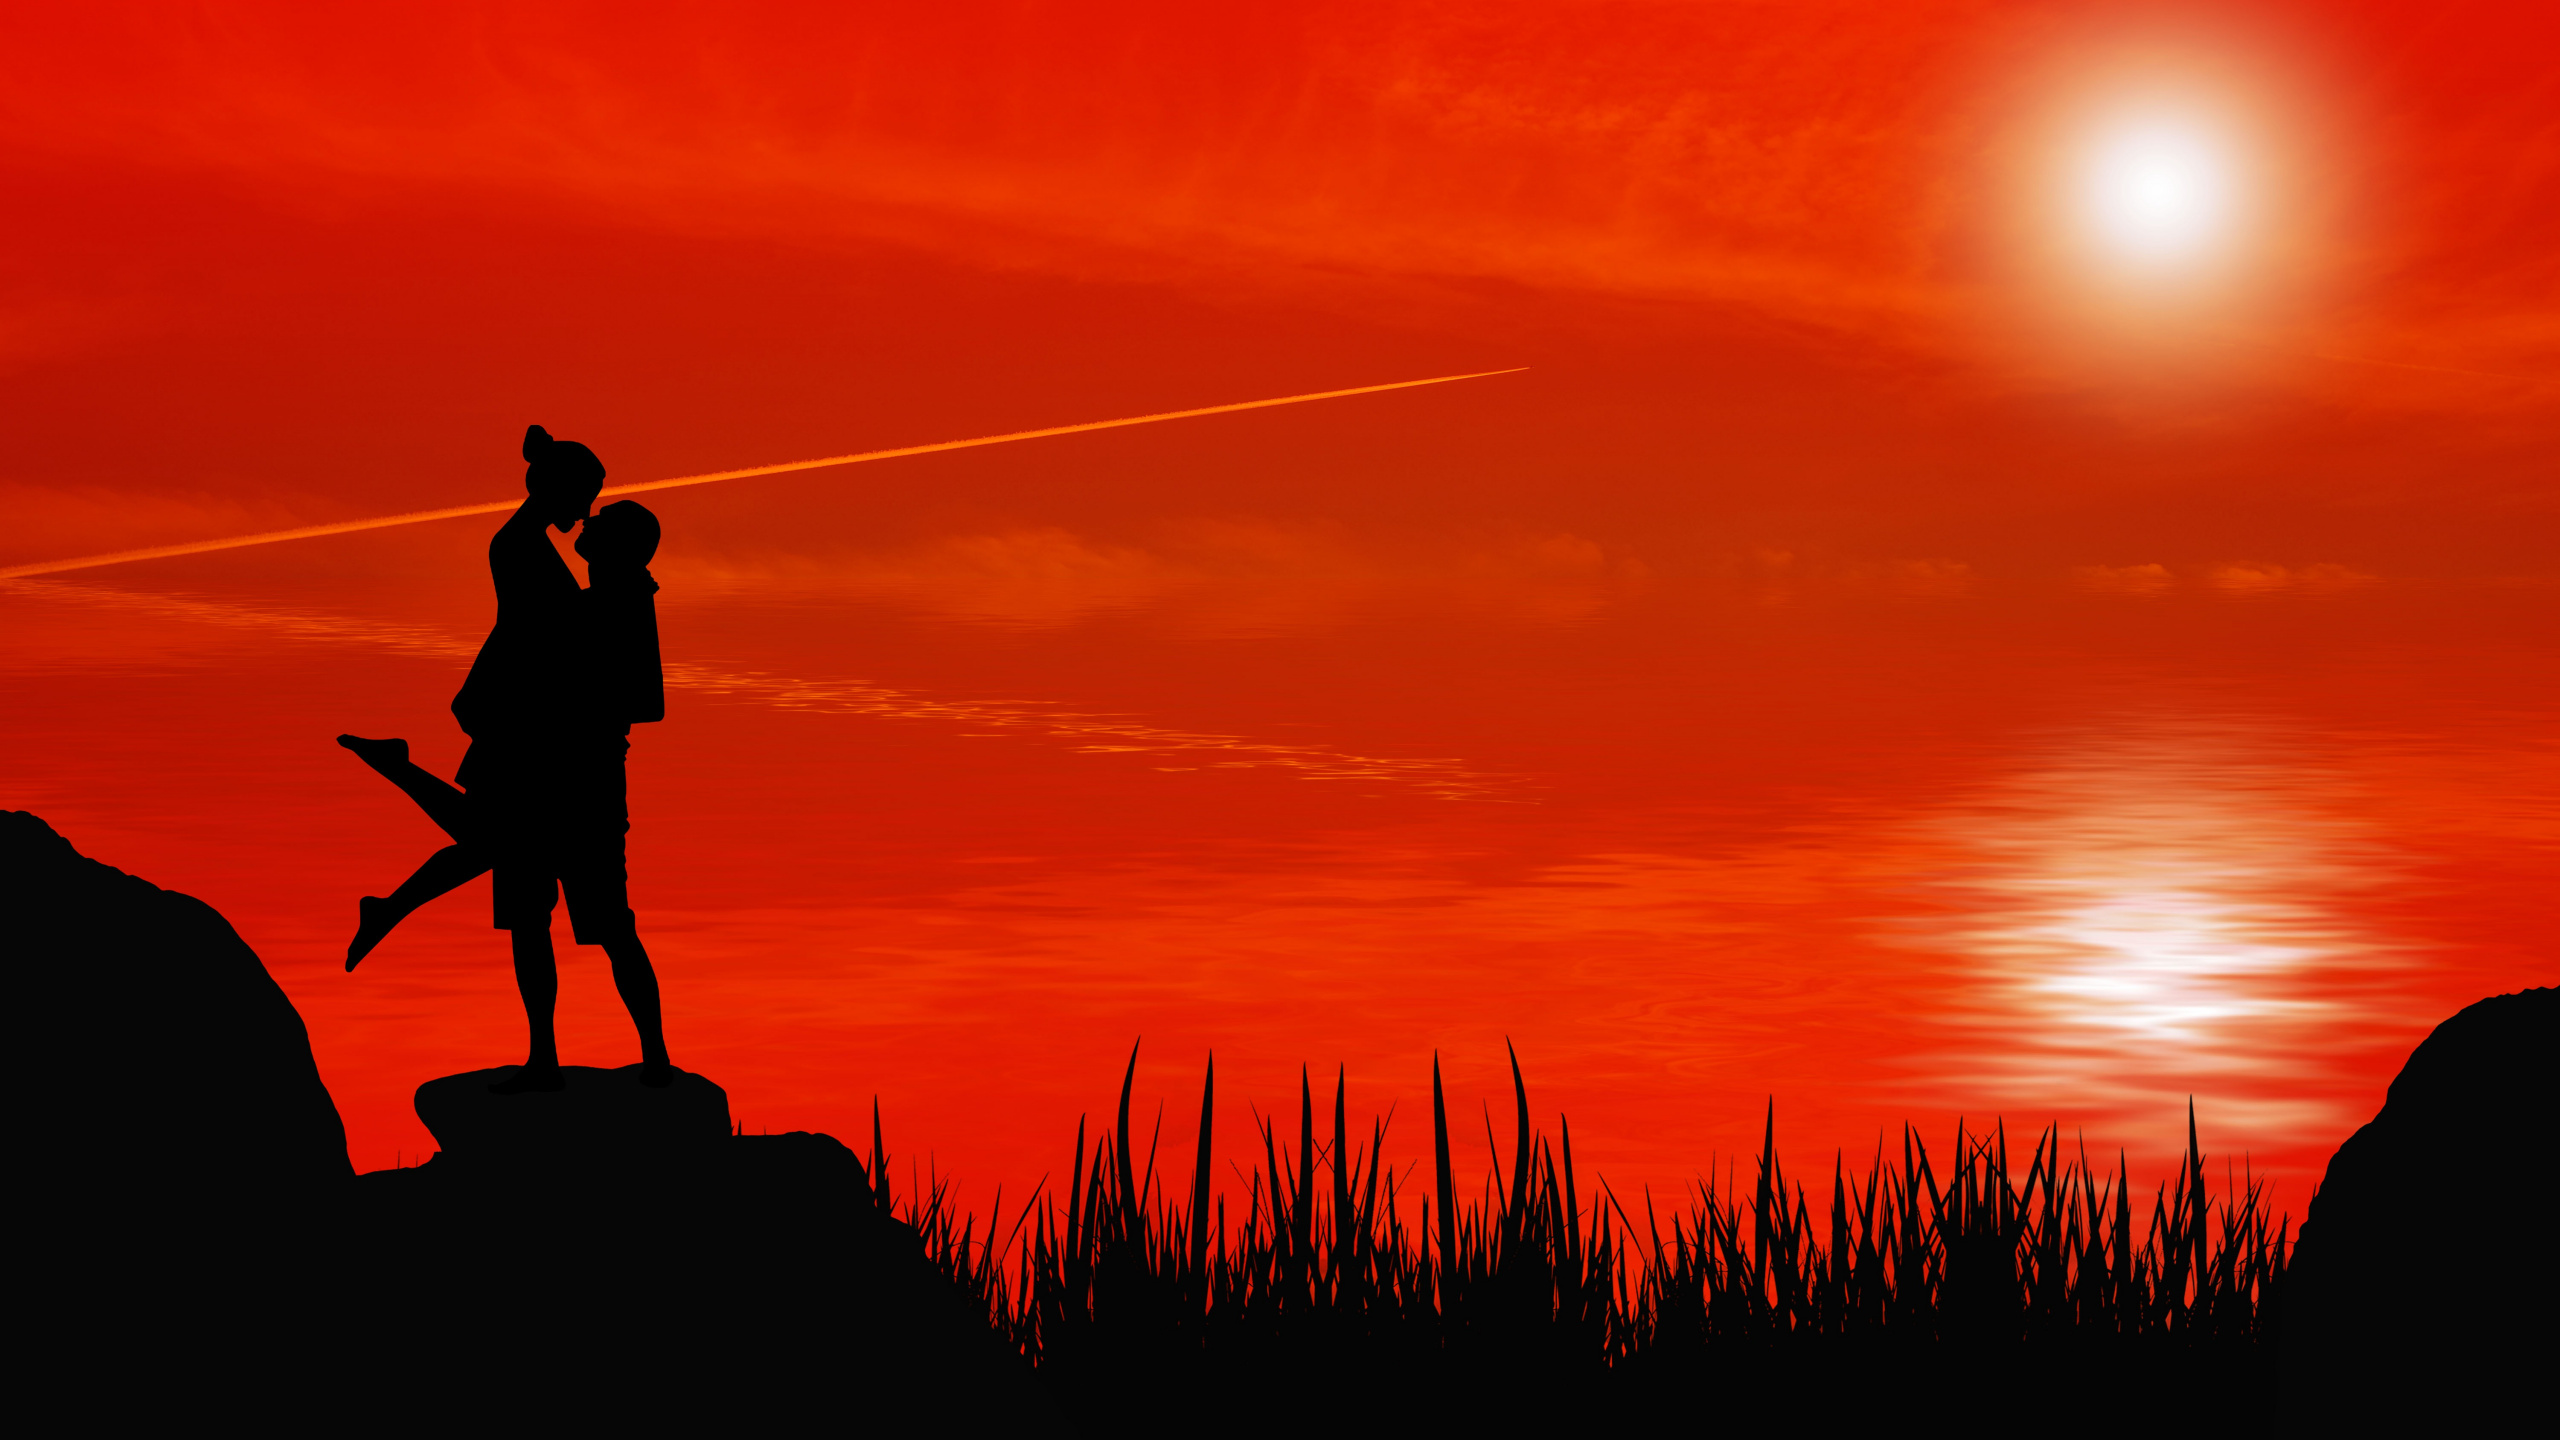 Silhouette, Sunset, Passion, People in Nature, Red. Wallpaper in 2560x1440 Resolution